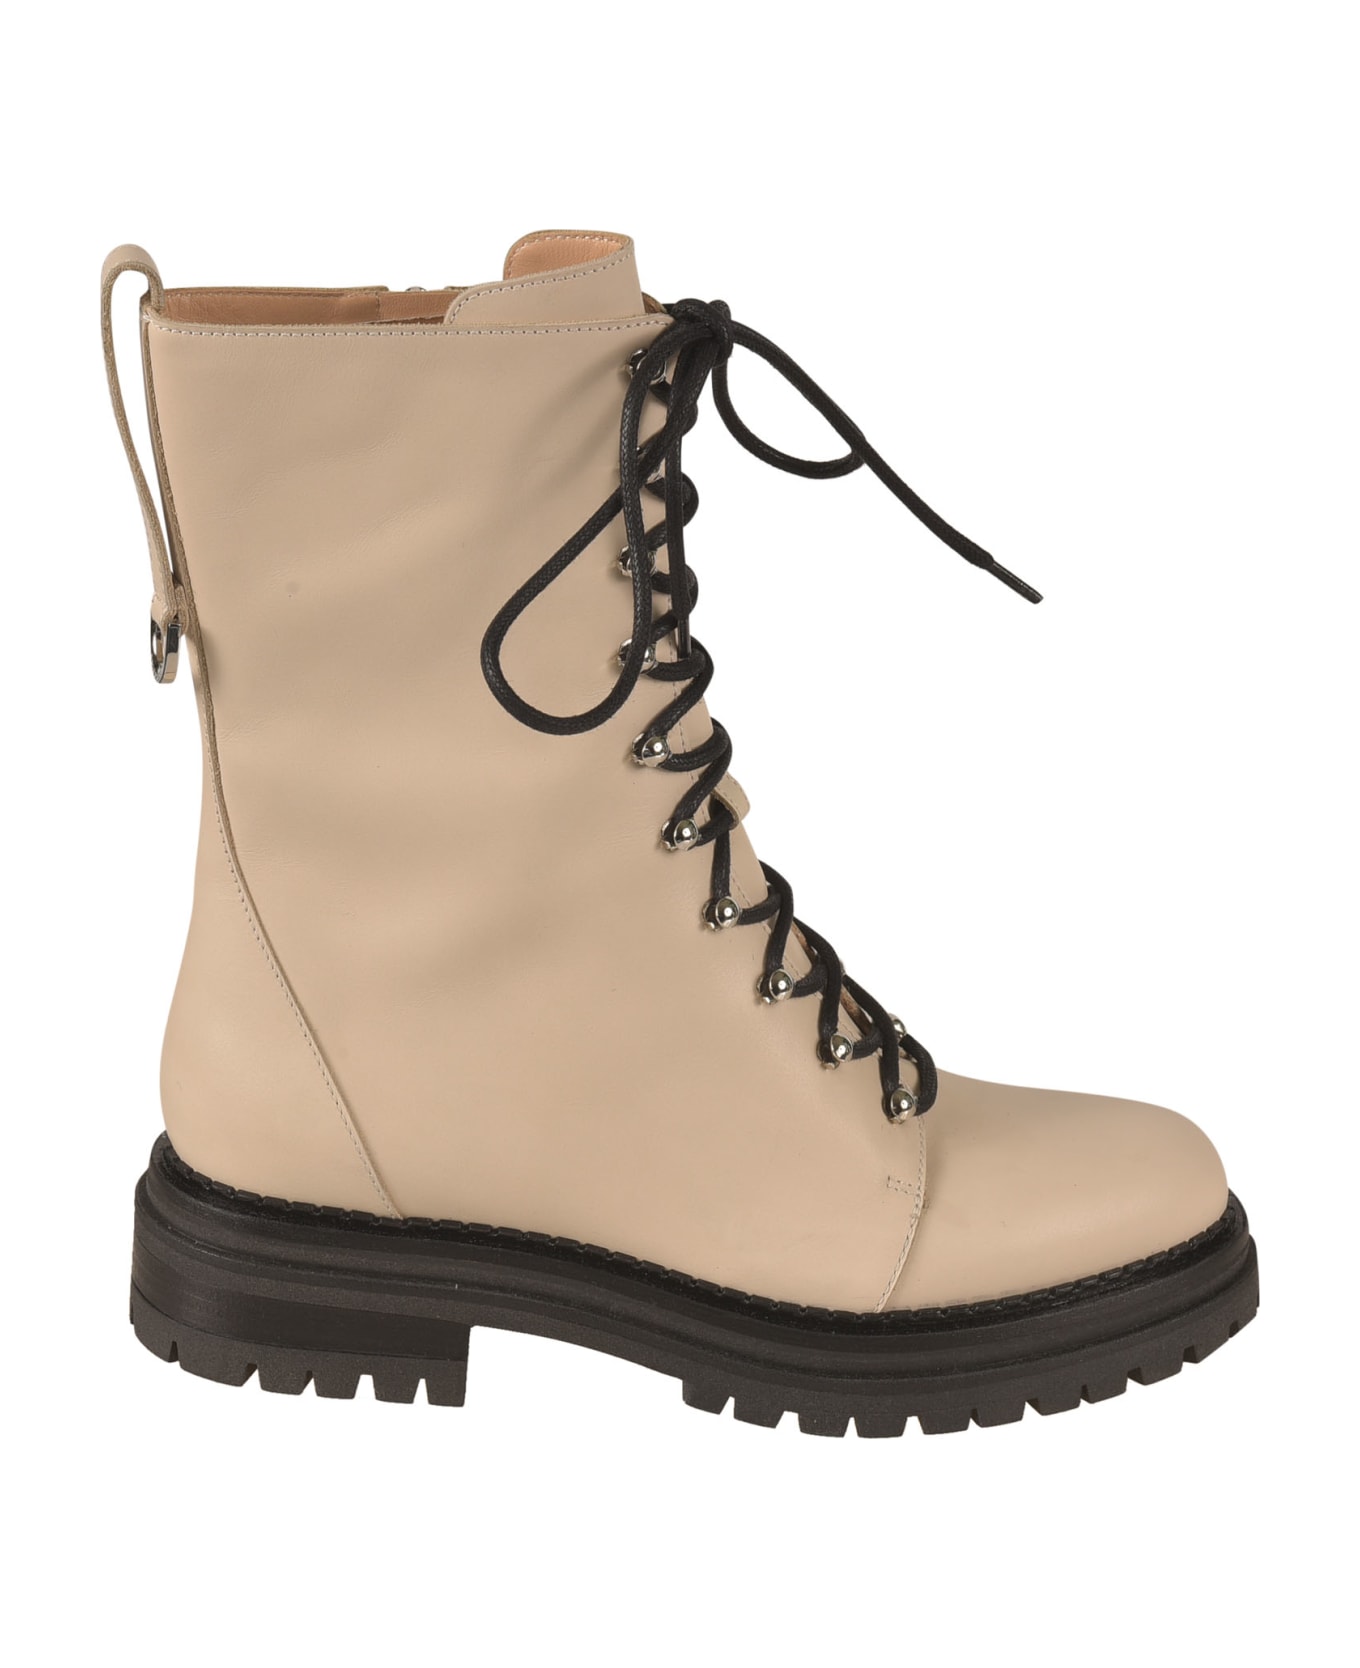 Sergio Rossi Joan Lace-up Boots - Beige ブーツ